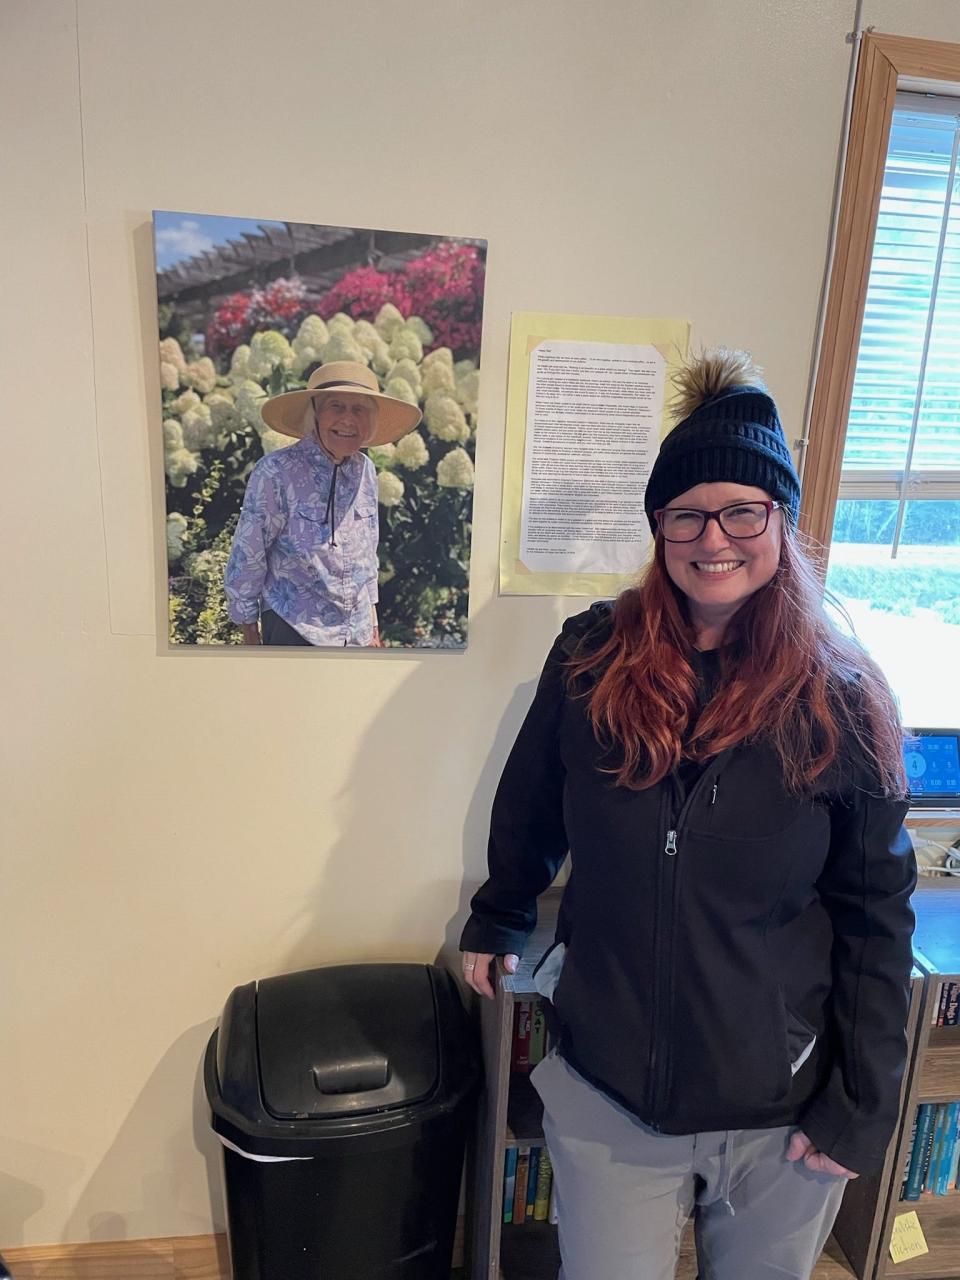 Woodson Branch Nature School Executive Director poses in Hazel Lee Hall in front of a photo of her grandmother, for whom the building is named.